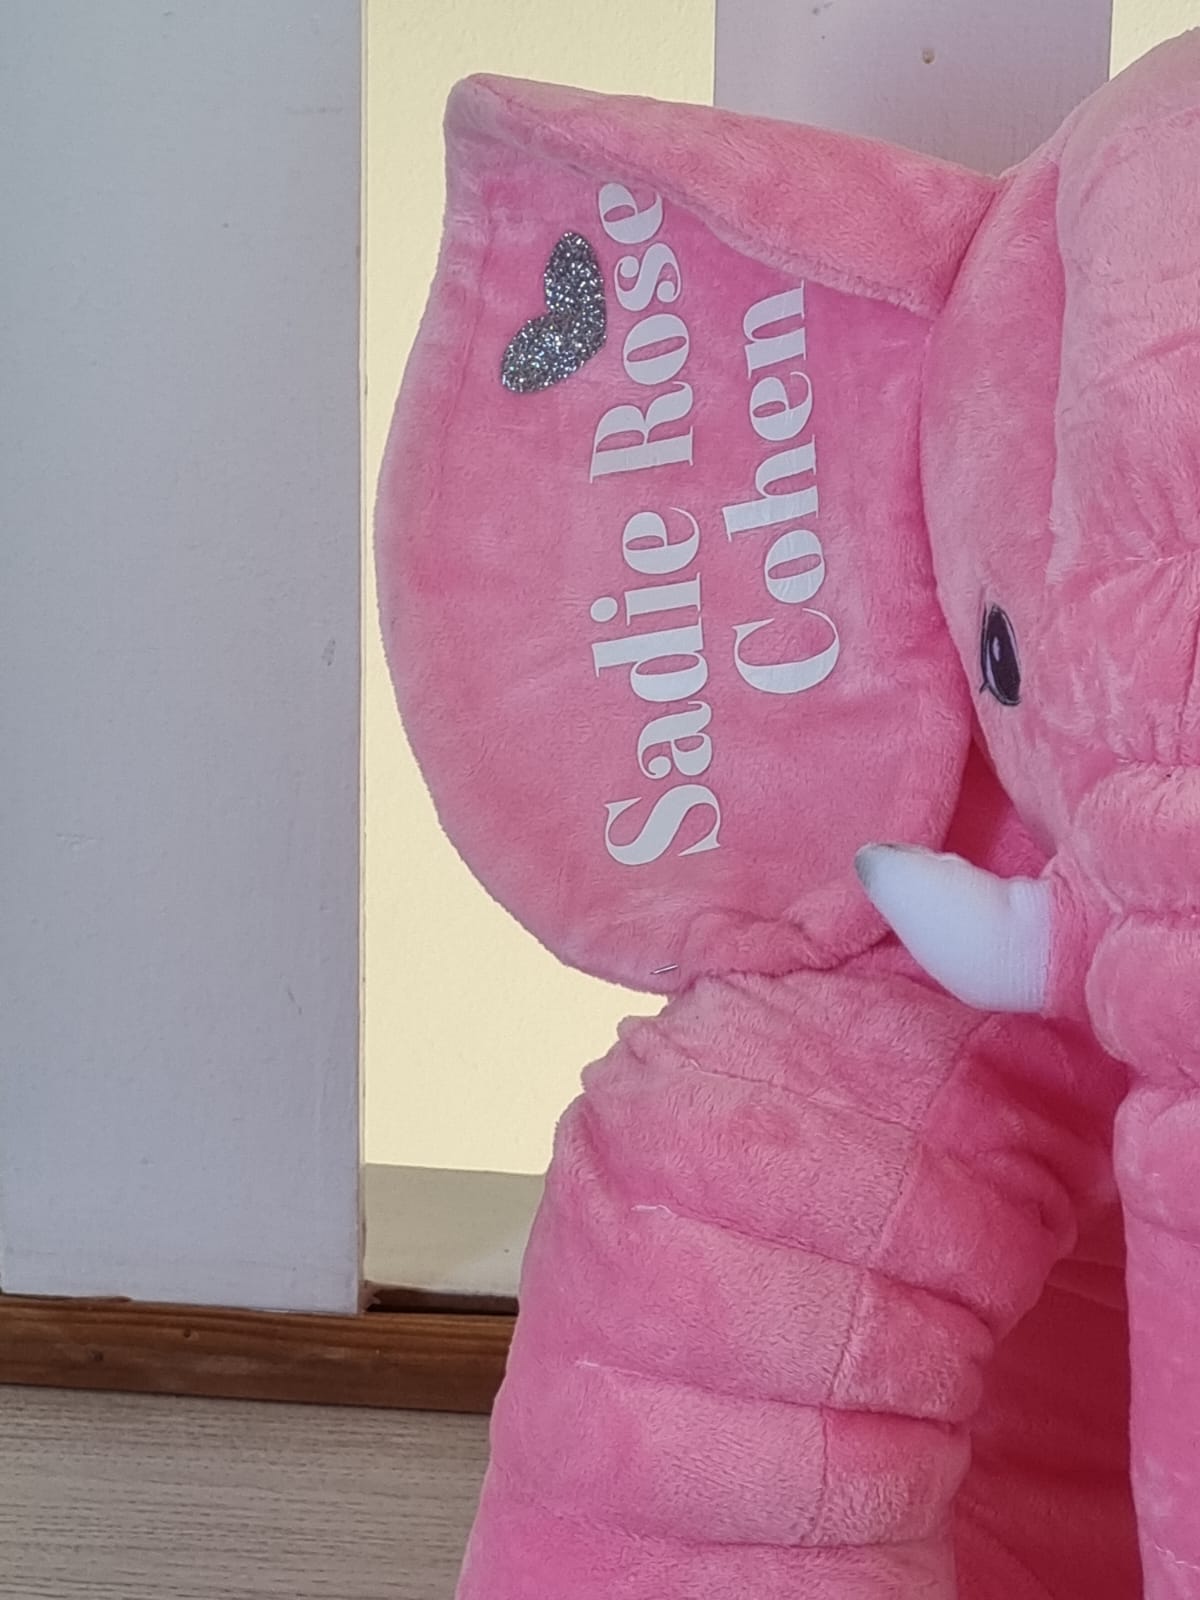 Plush animals with name and birth date